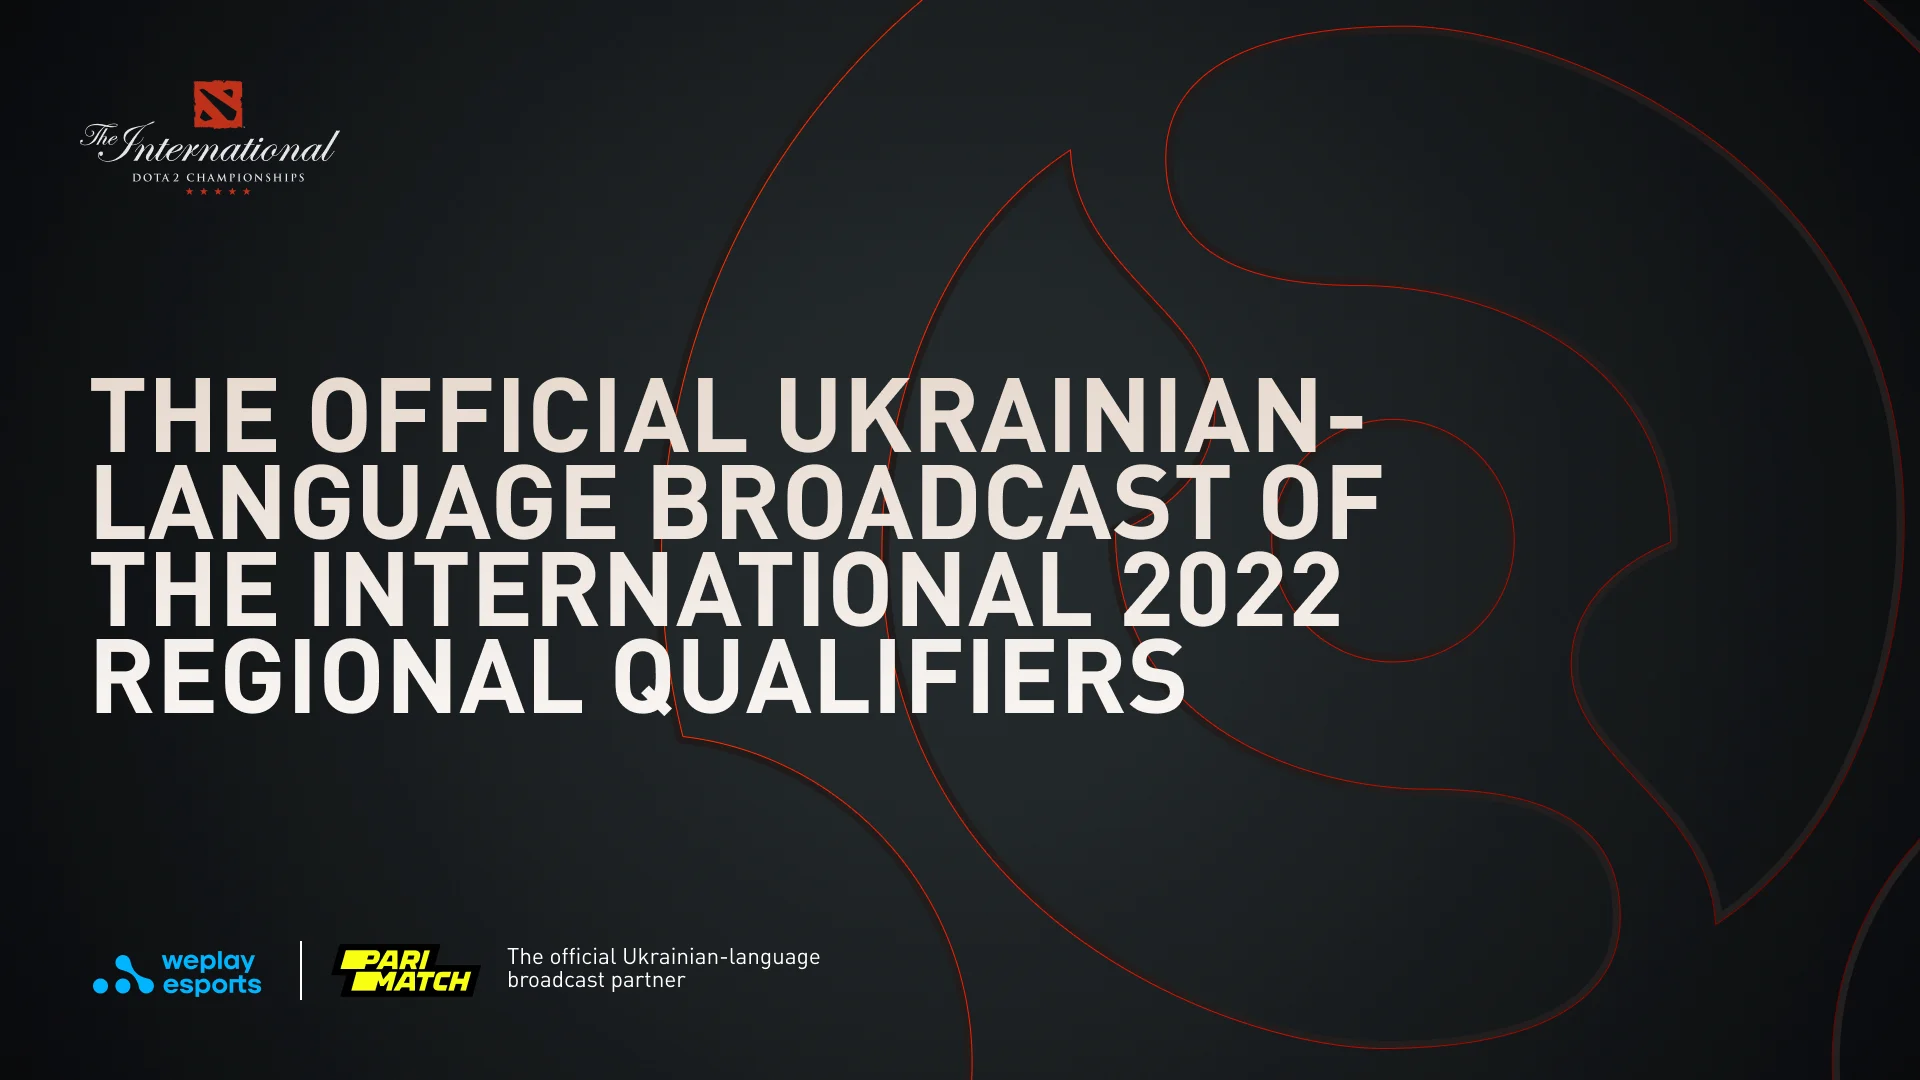 WePlay Esports to produce the official Ukrainian-language broadcast of The International 2022 Regional Qualifiers. Visual: WePlay Holding